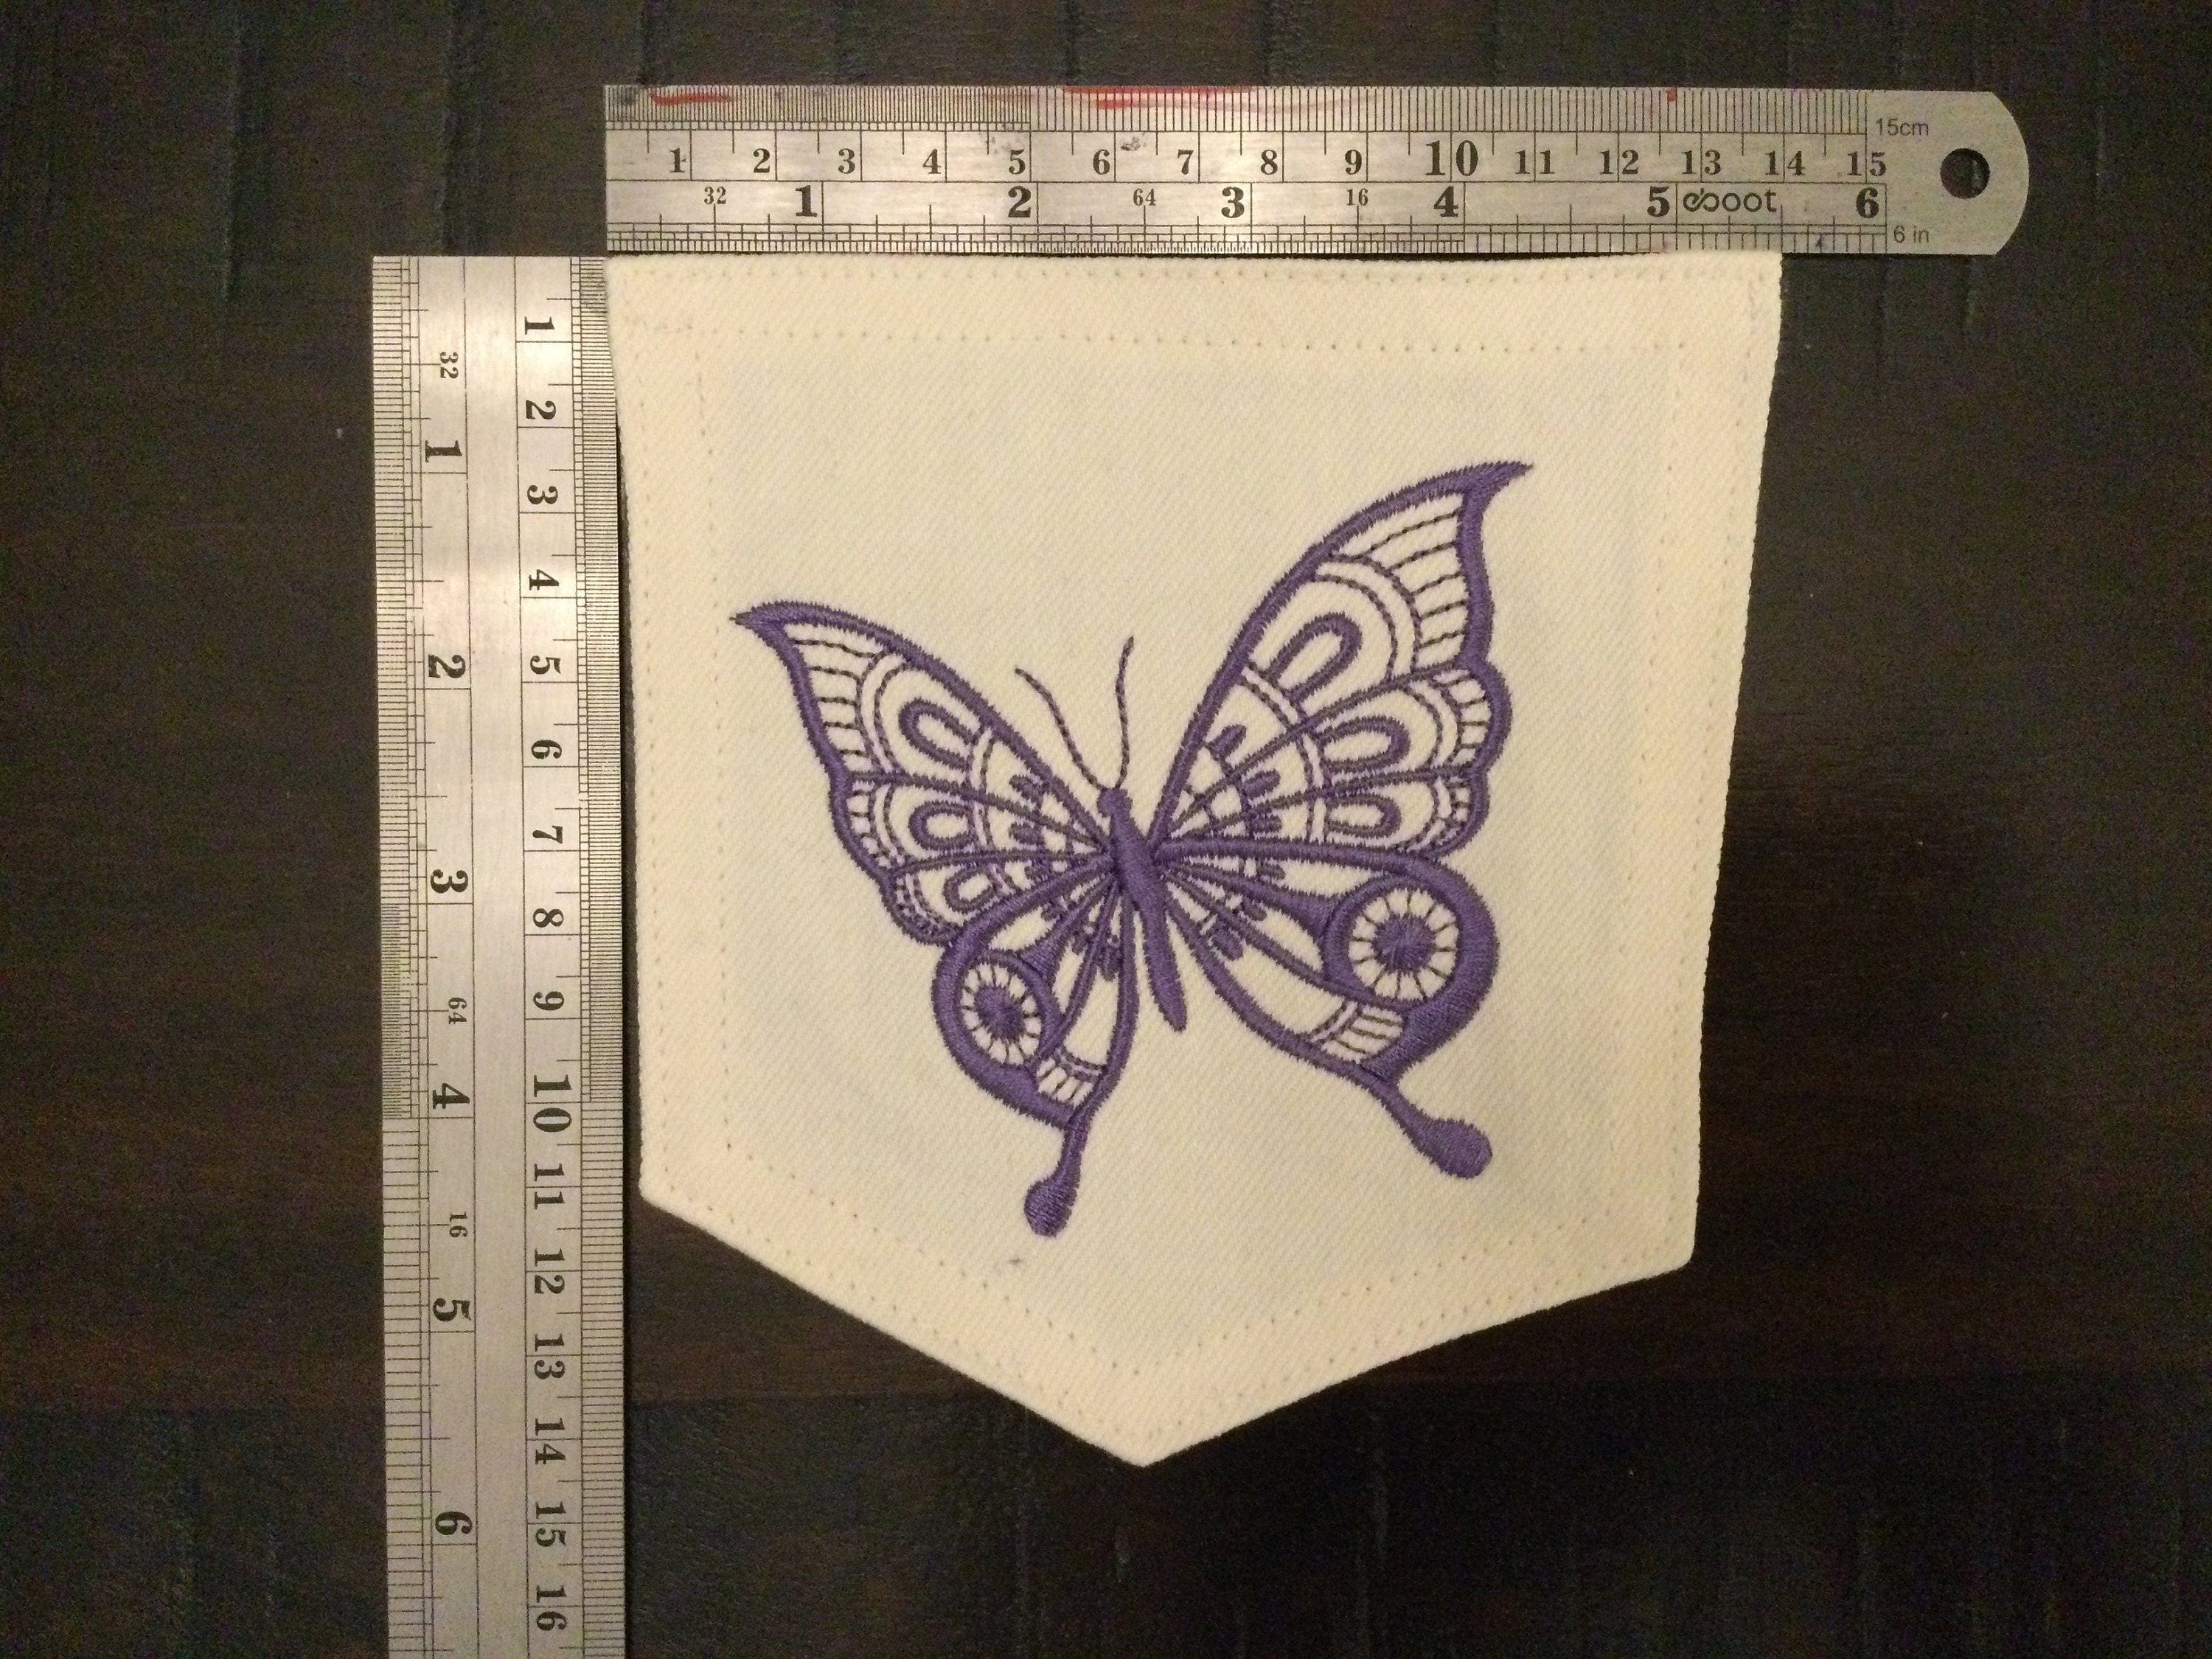 Hot Pocket White DENIM Handmade Pocket Patch with Embroidered purple BUTTERFLY PATCH with Pizzazz Appliques & Patches